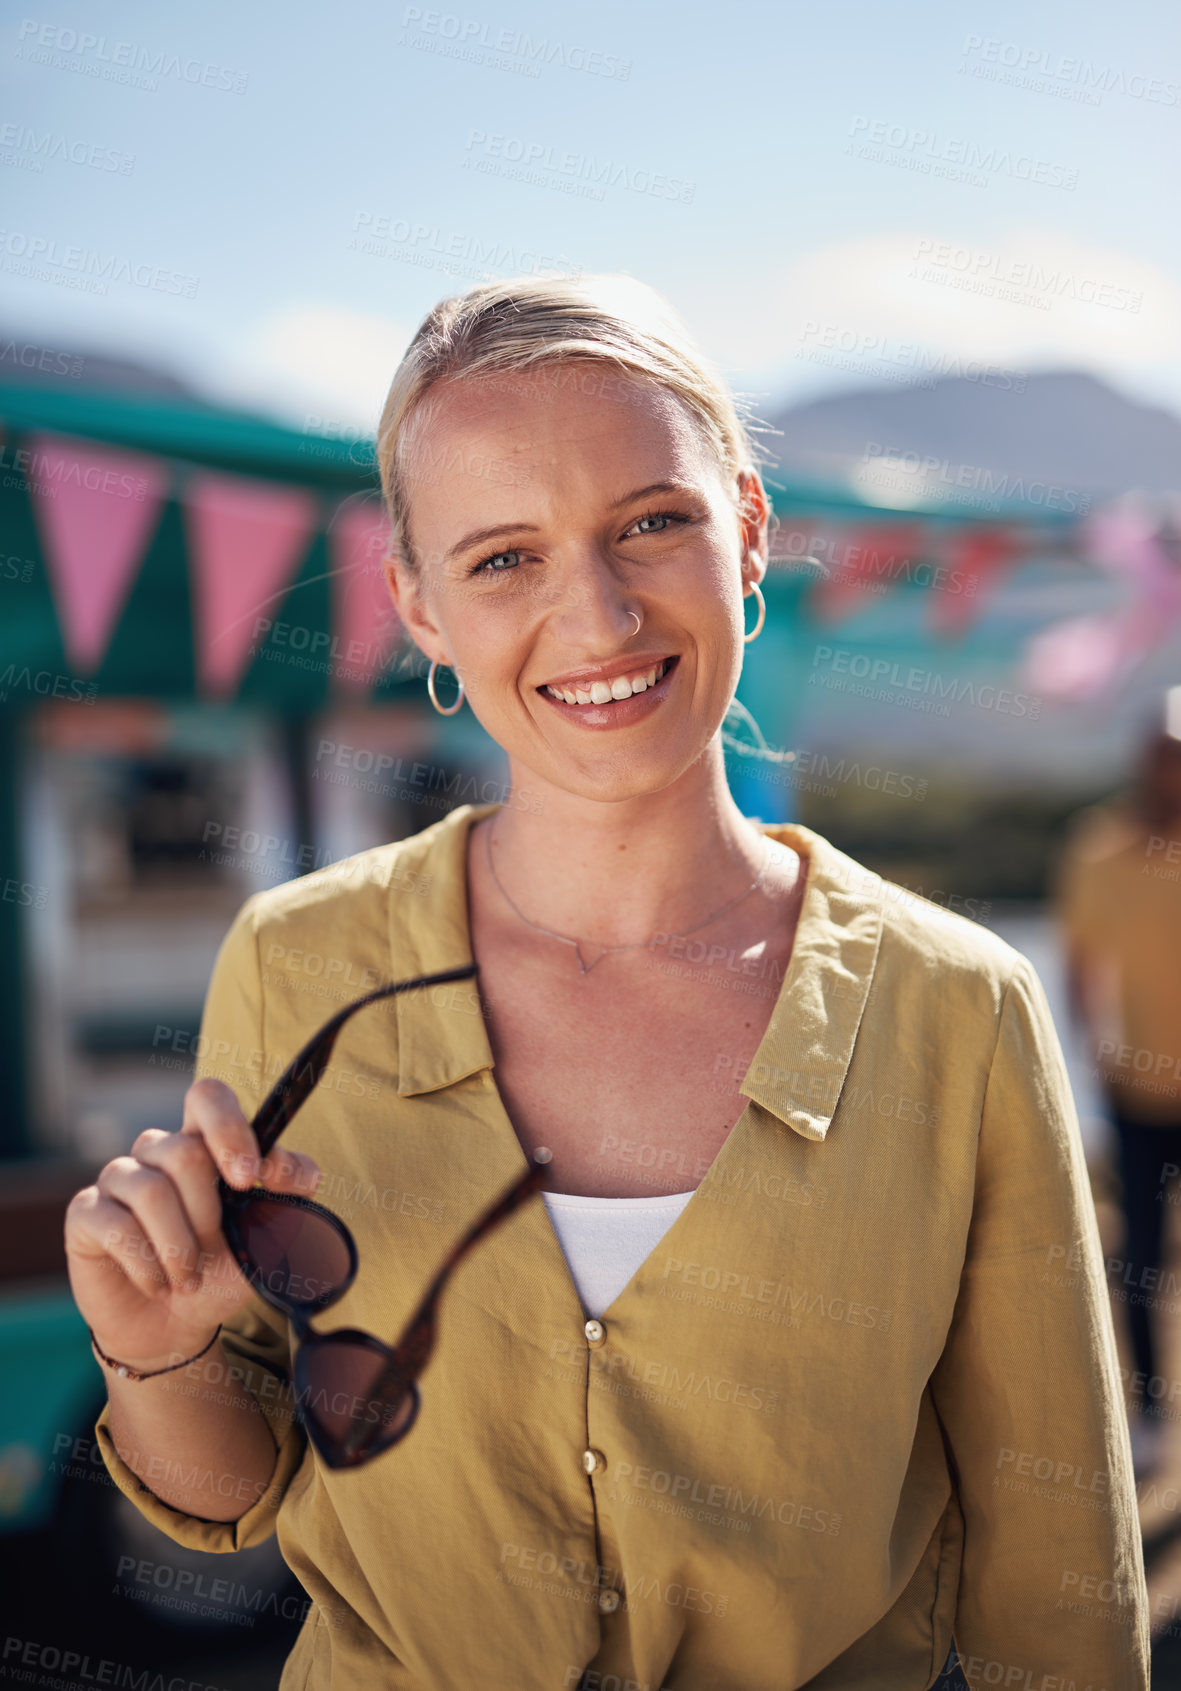 Buy stock photo Portrait of a cheerful young woman smiling brightly while standing outside on a beach promenade during the day